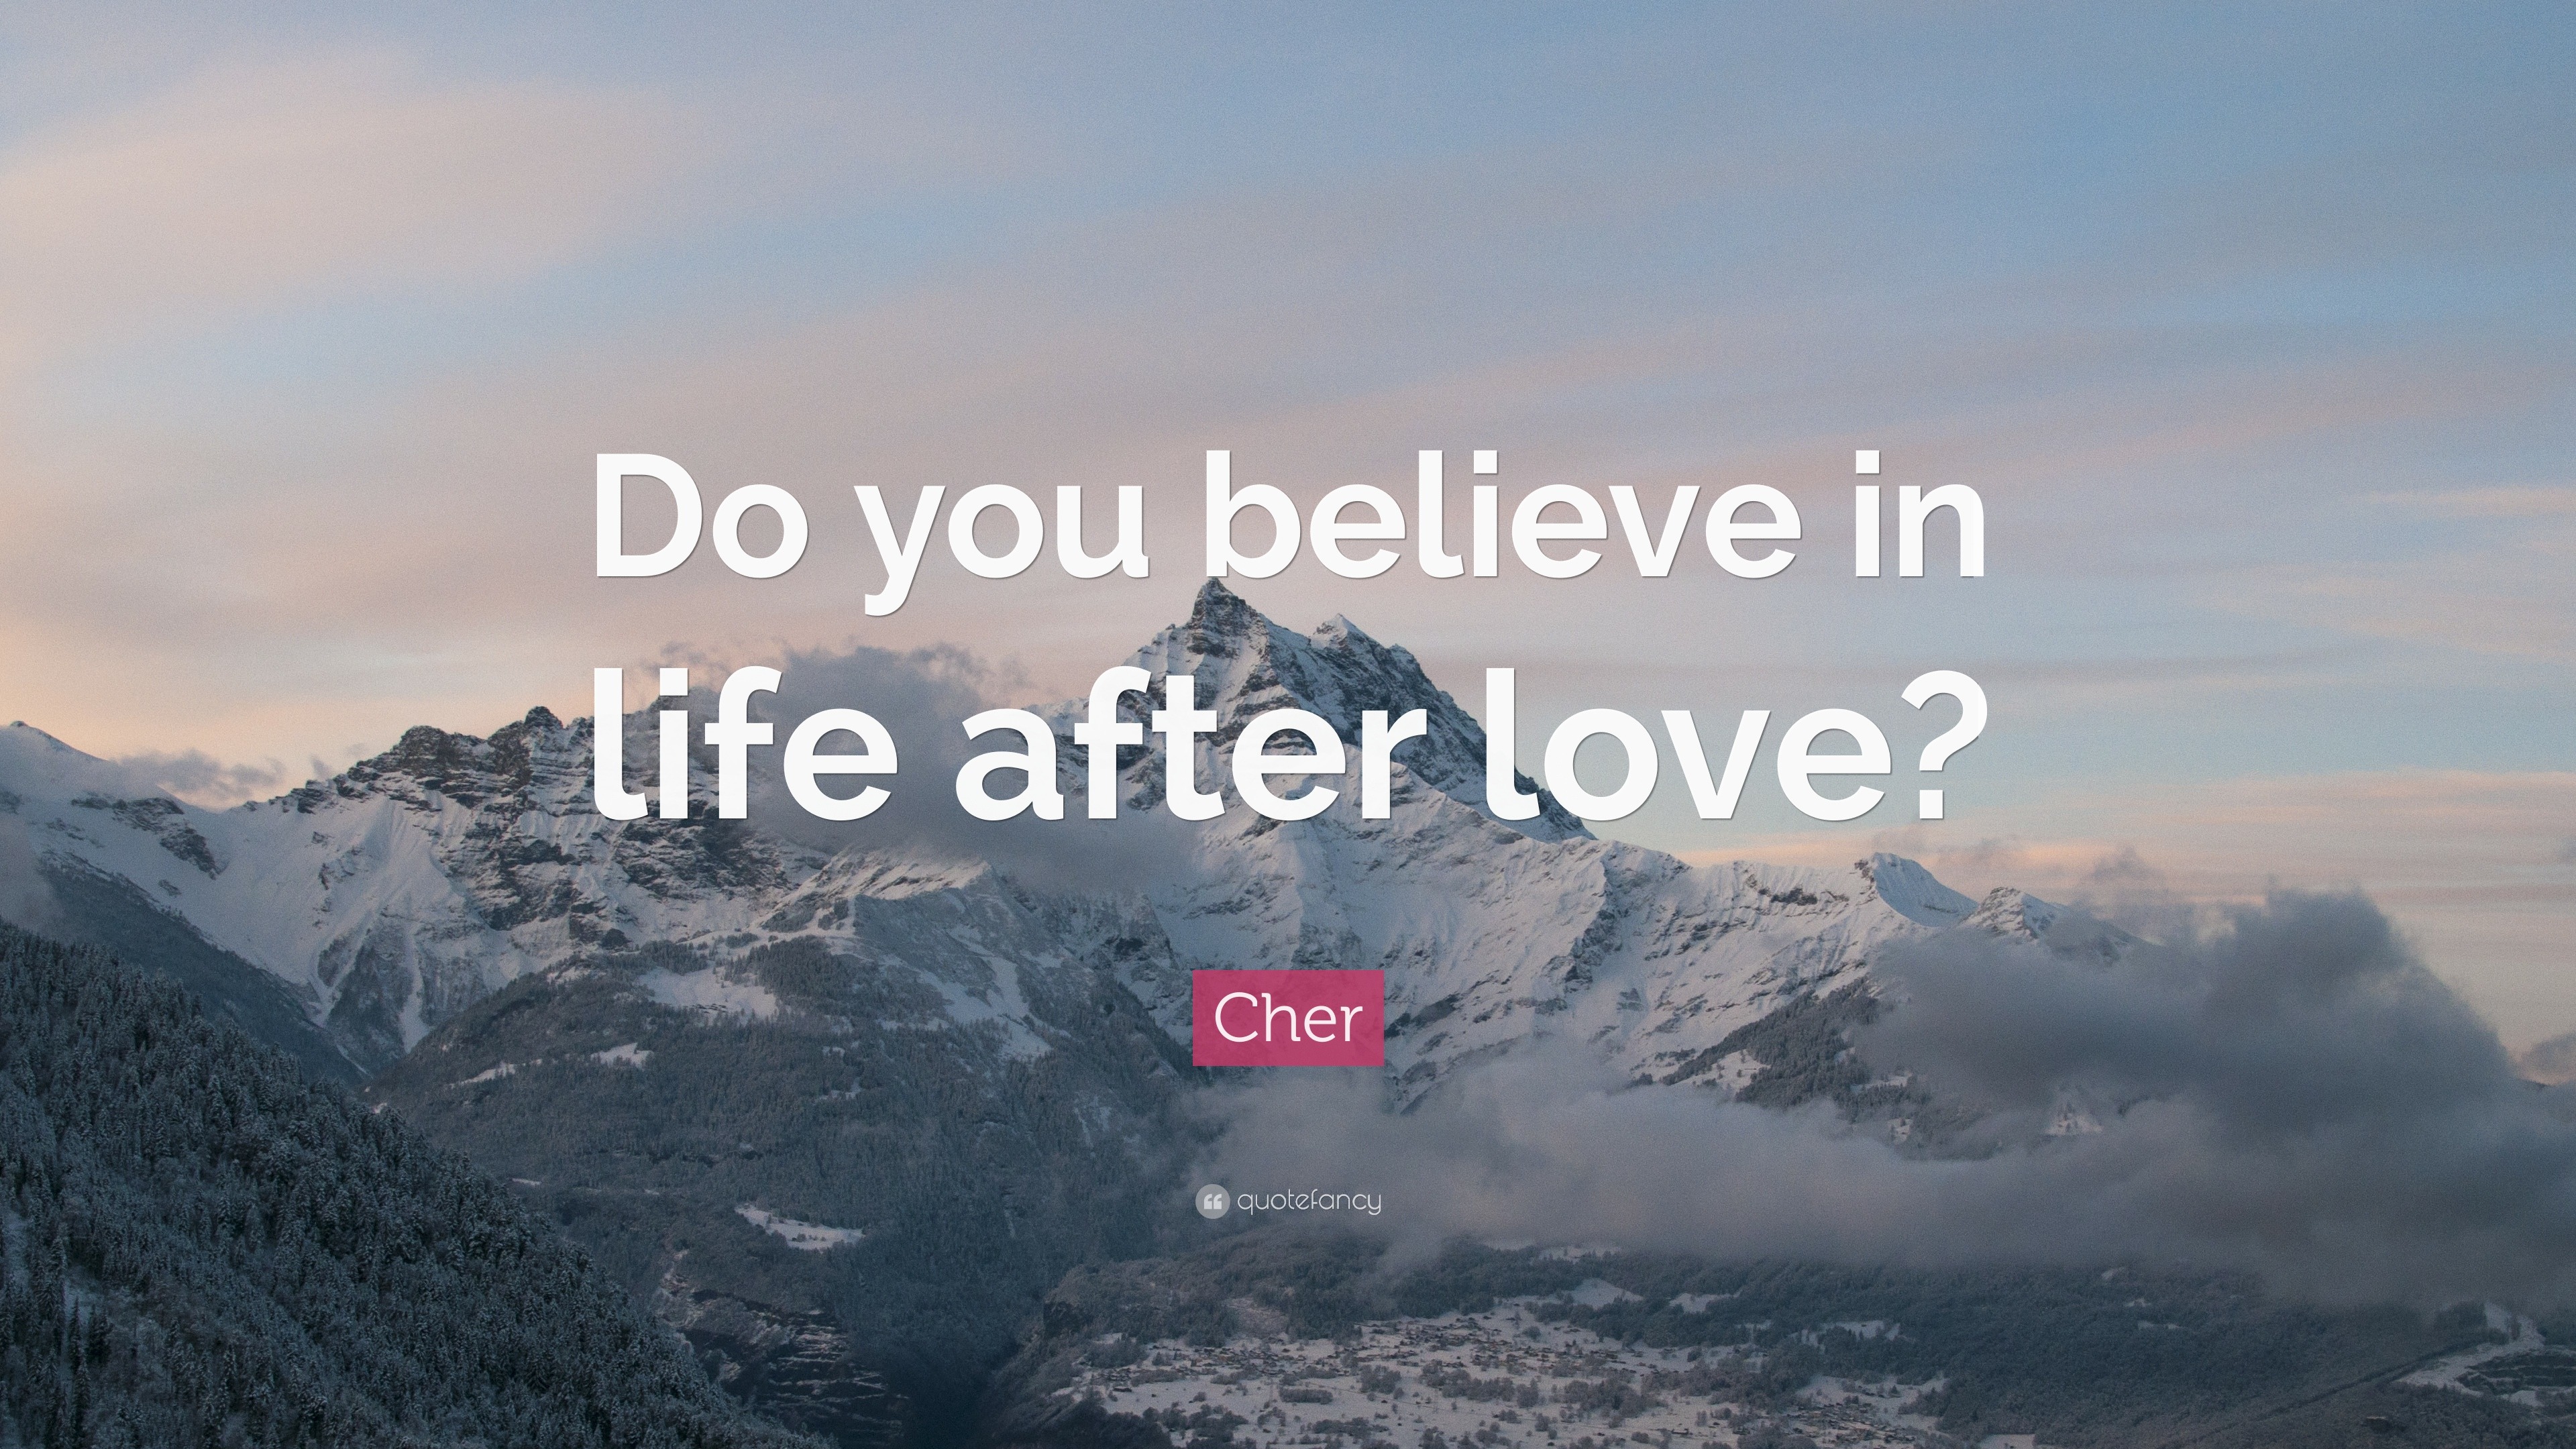 Cher Quote “Do you believe in life after love ”